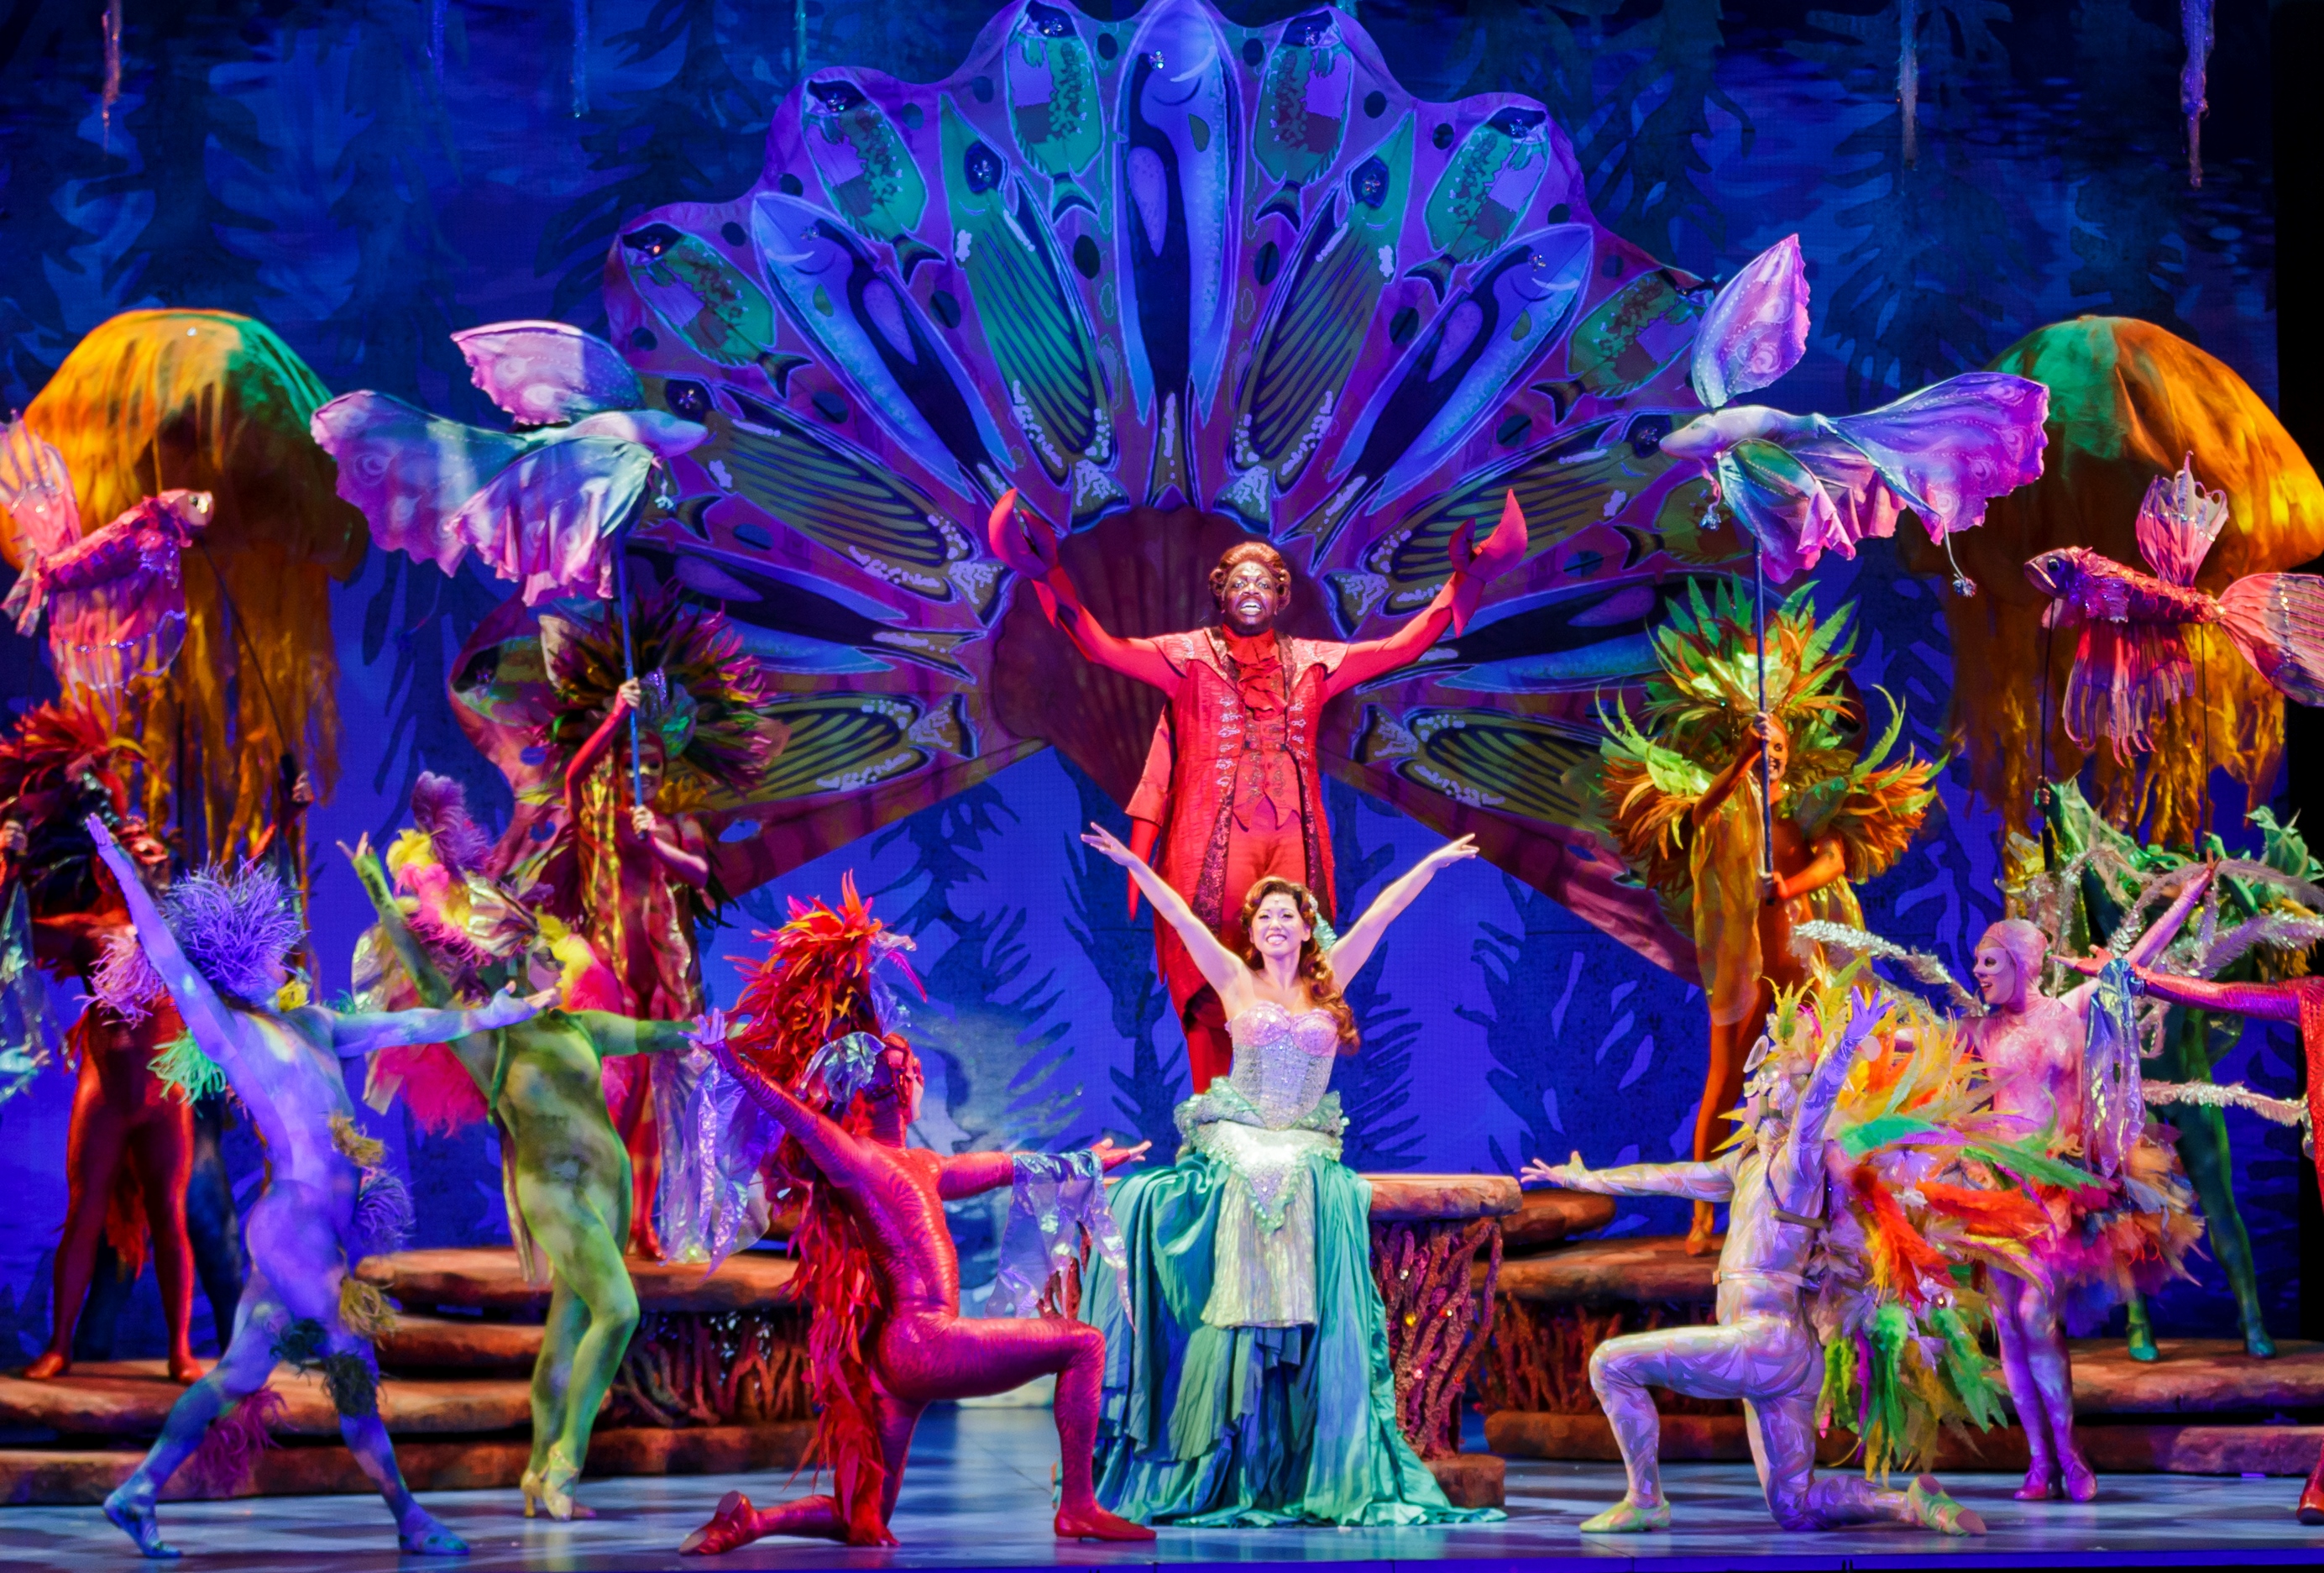 Meet The Cast Of The Little Mermaid The Broadway Musical At The ...